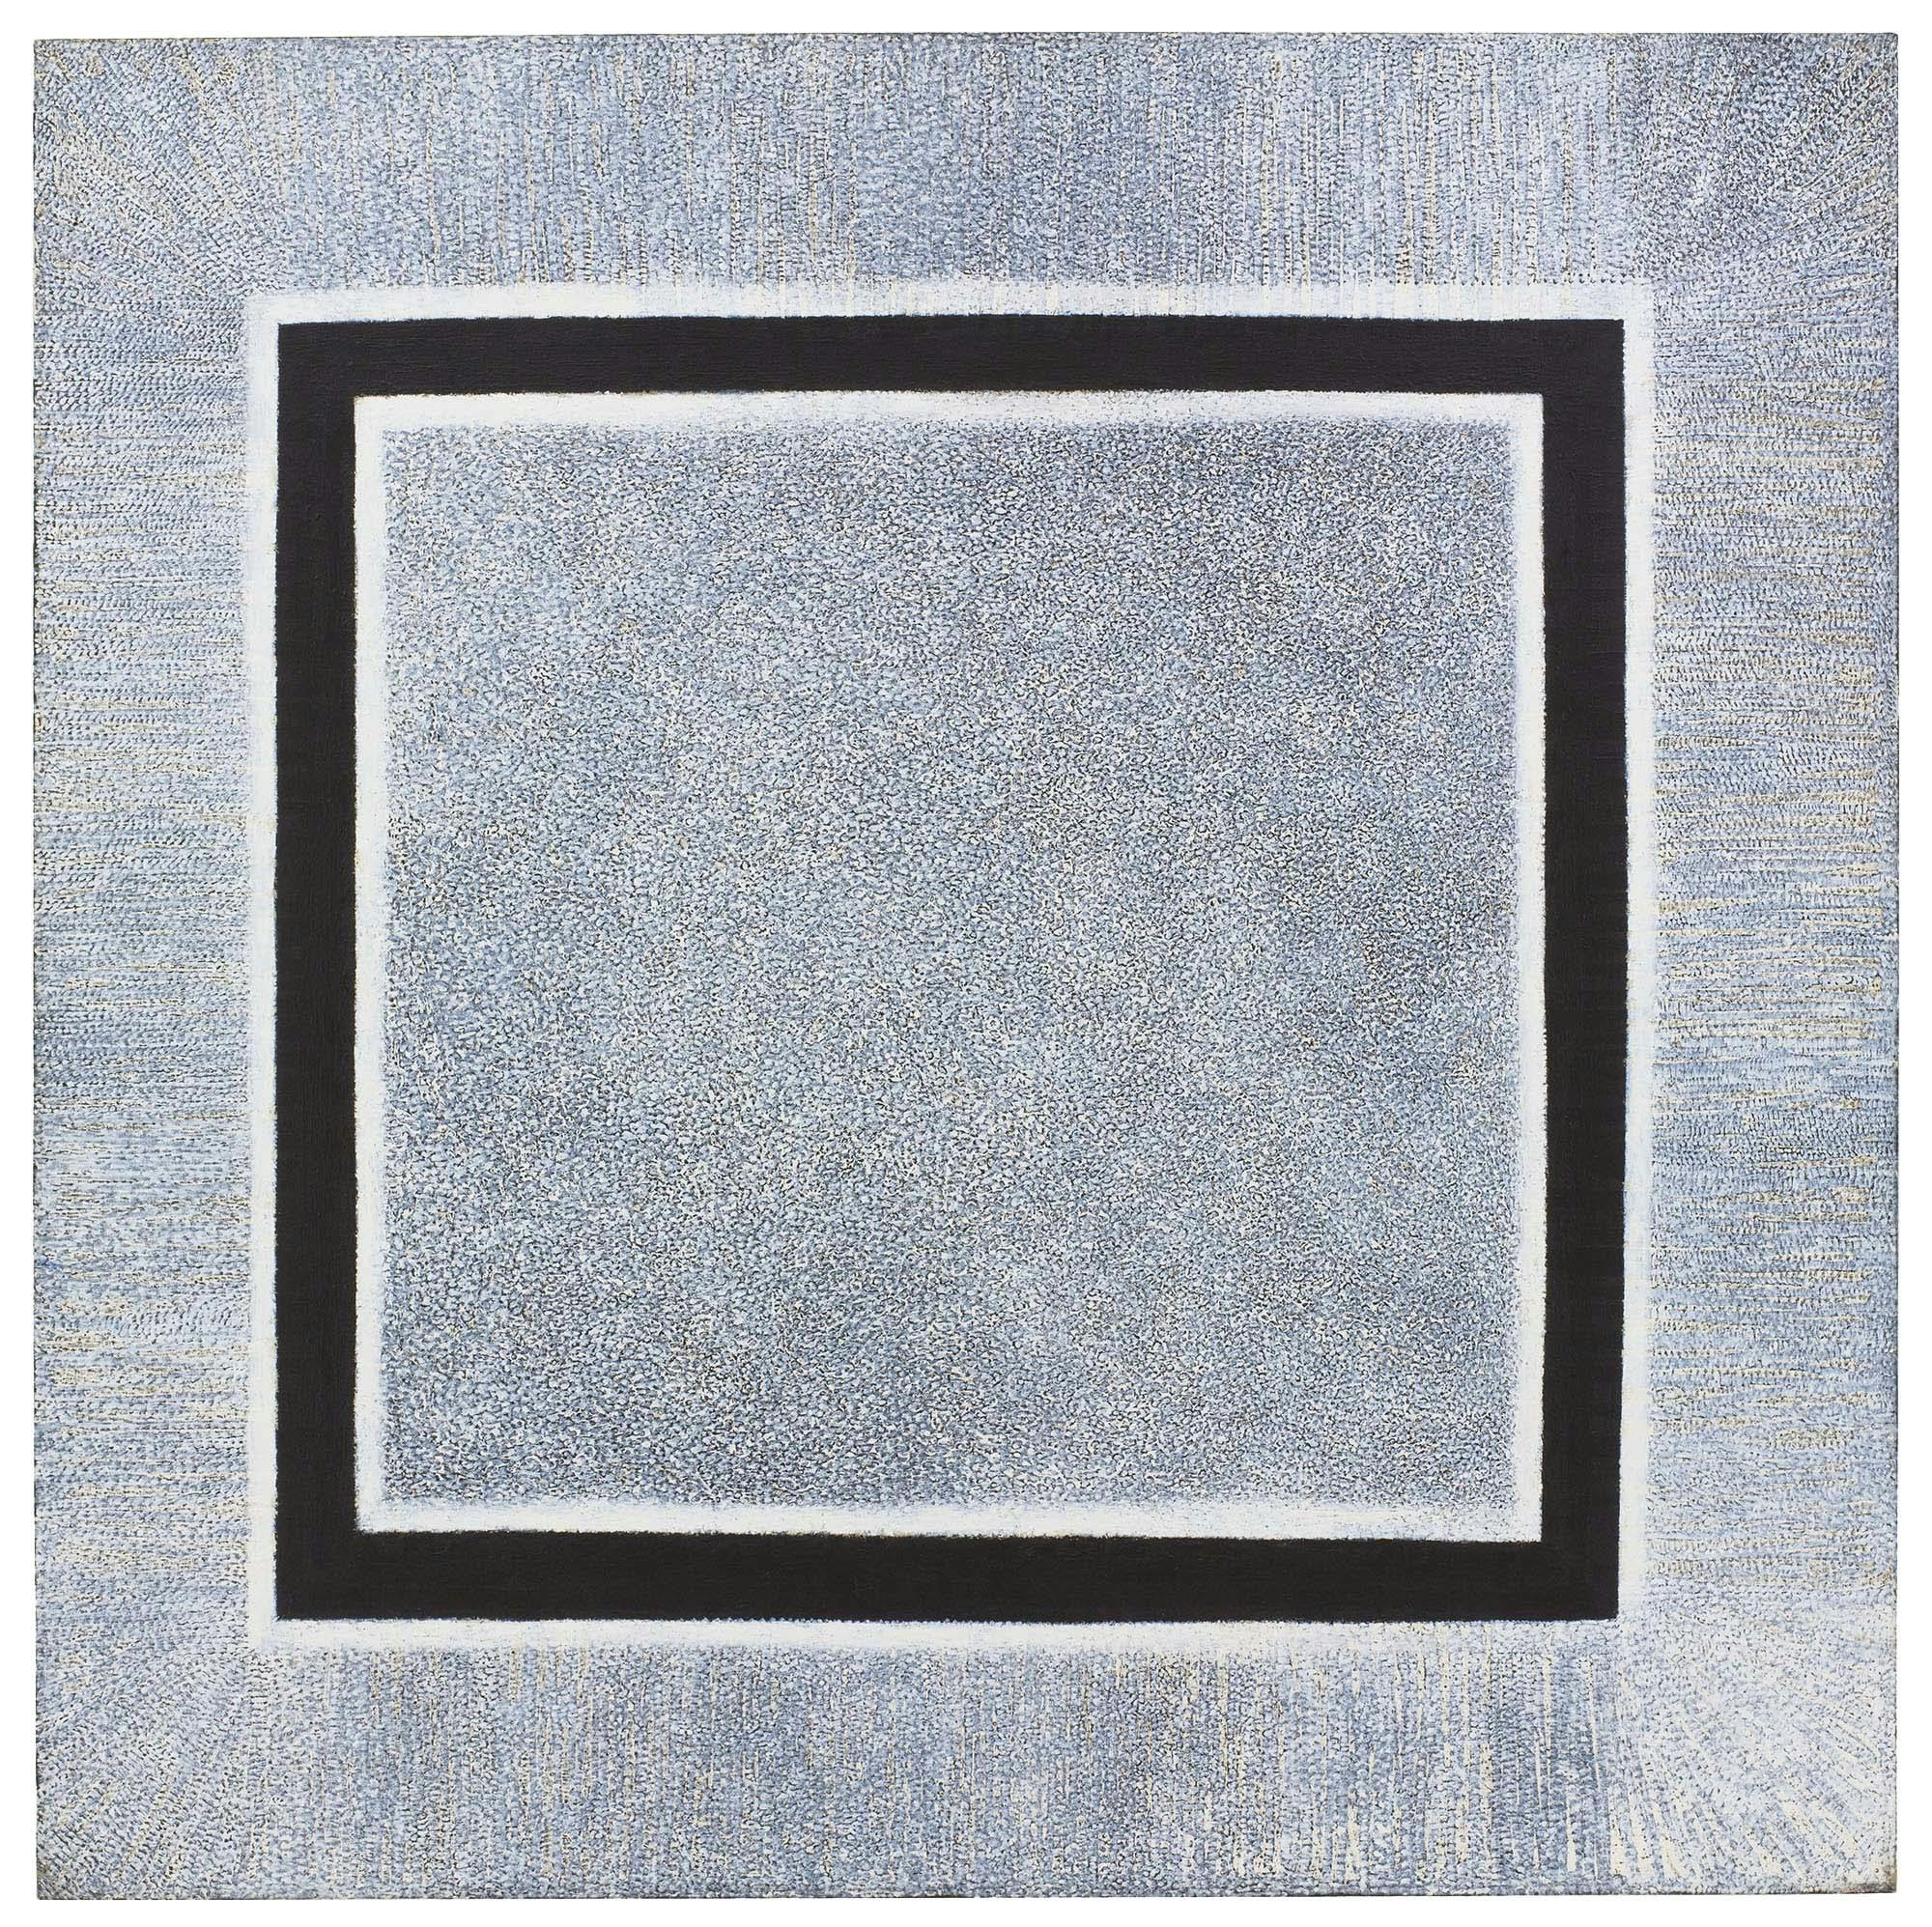 Mirror of Space
1979–80
Acrylic on linen
90 x 90 in. (228.6 x 228.6 cm)
 – The Richard Pousette-Dart Foundation